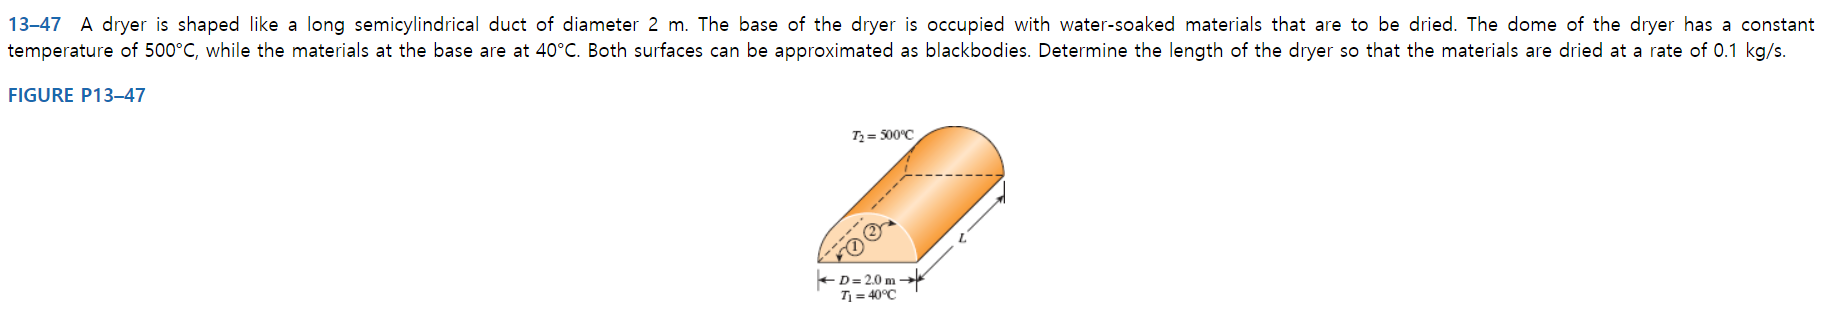 13-47 A dryer is shaped like a long semicylindrical duct of diameter 2 m. The base of the dryer is occupied with water-soaked materials that are to be dried. The dome of the dryer has a constant
temperature of 500°C, while the materials at the base are at 40°C. Both surfaces can be approximated as blackbodies. Determine the length of the dryer so that the materials are dried at a rate of 0.1 kg/s.
FIGURE P13–47
Tz = 500°C
-----
-D= 2.0 m -
T = 40°C
